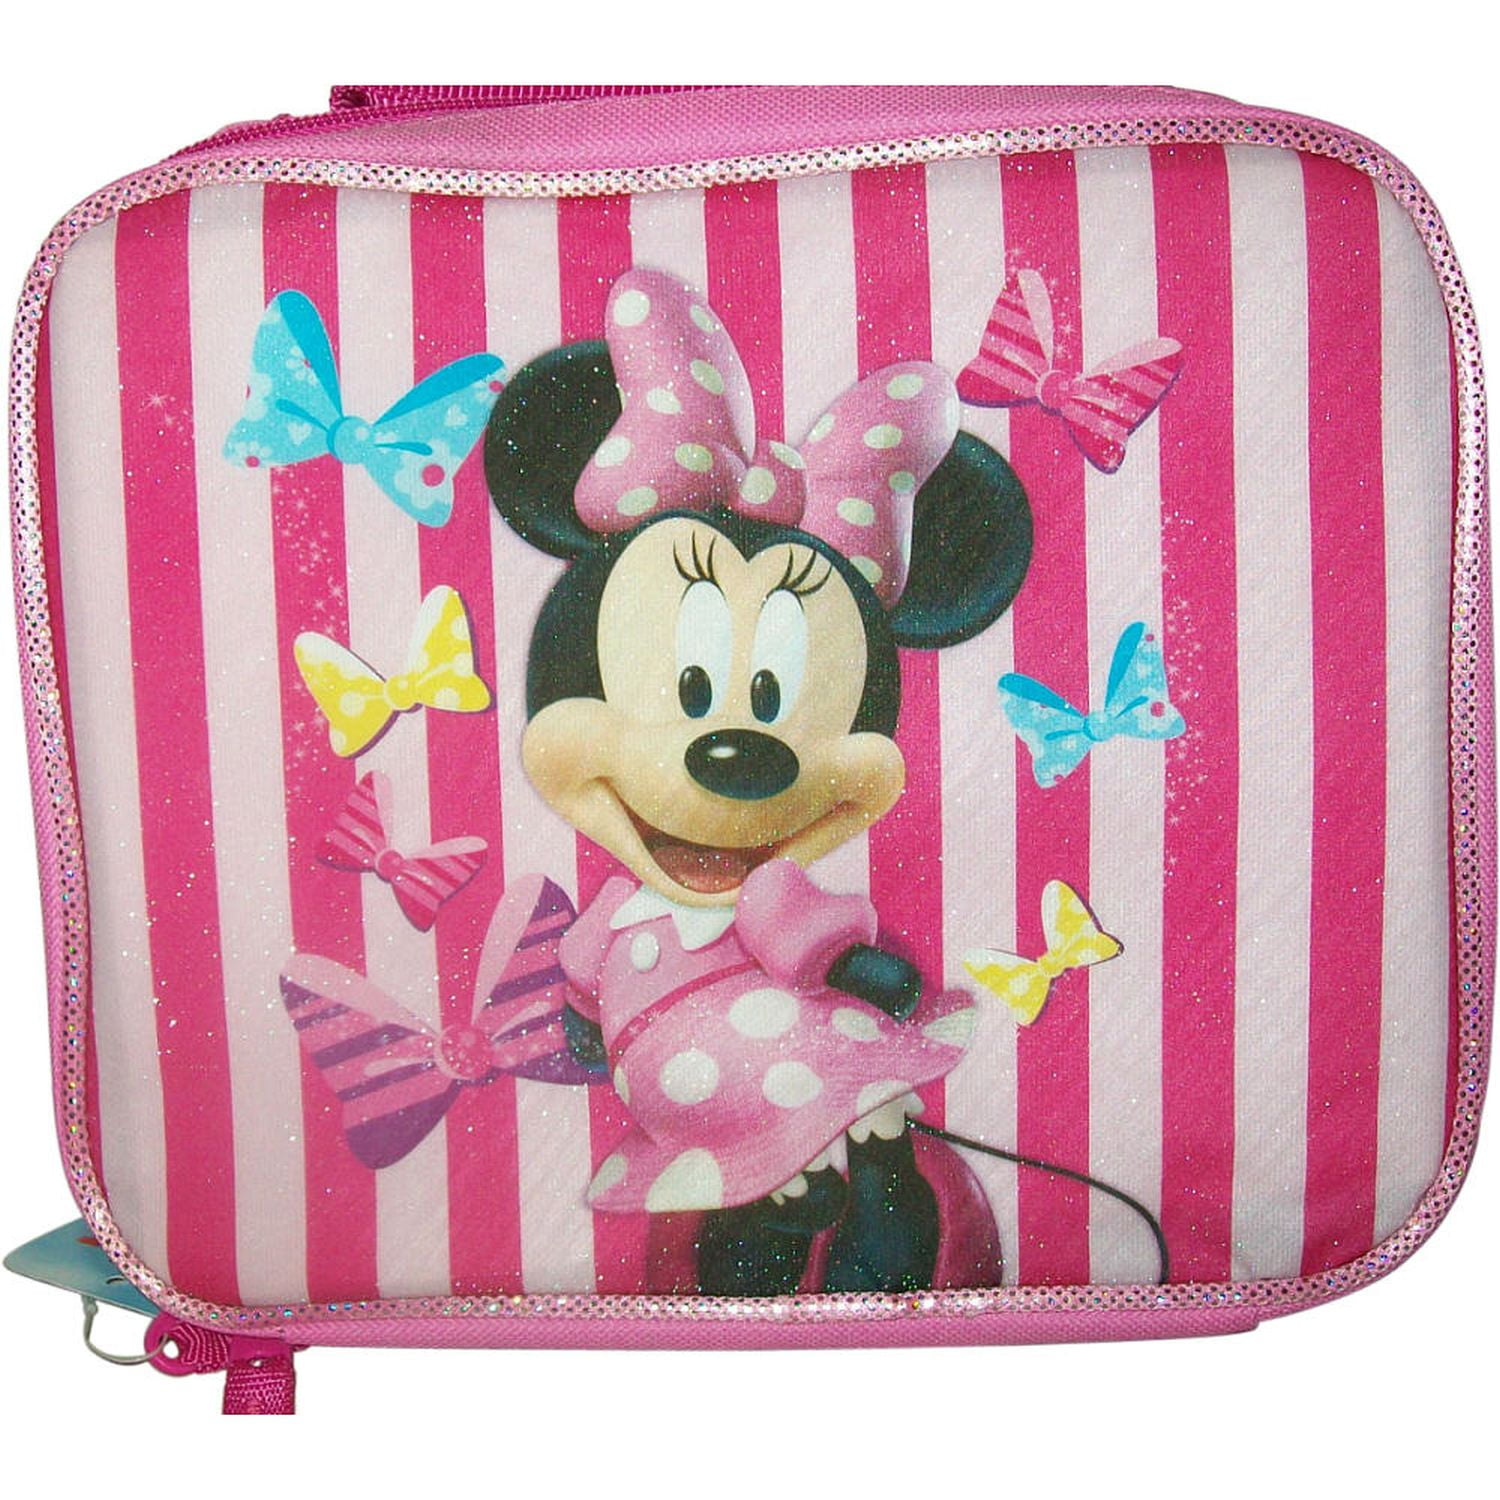 CLEARANCE SALE Personalized Minnie Mouse Lunch Bag 